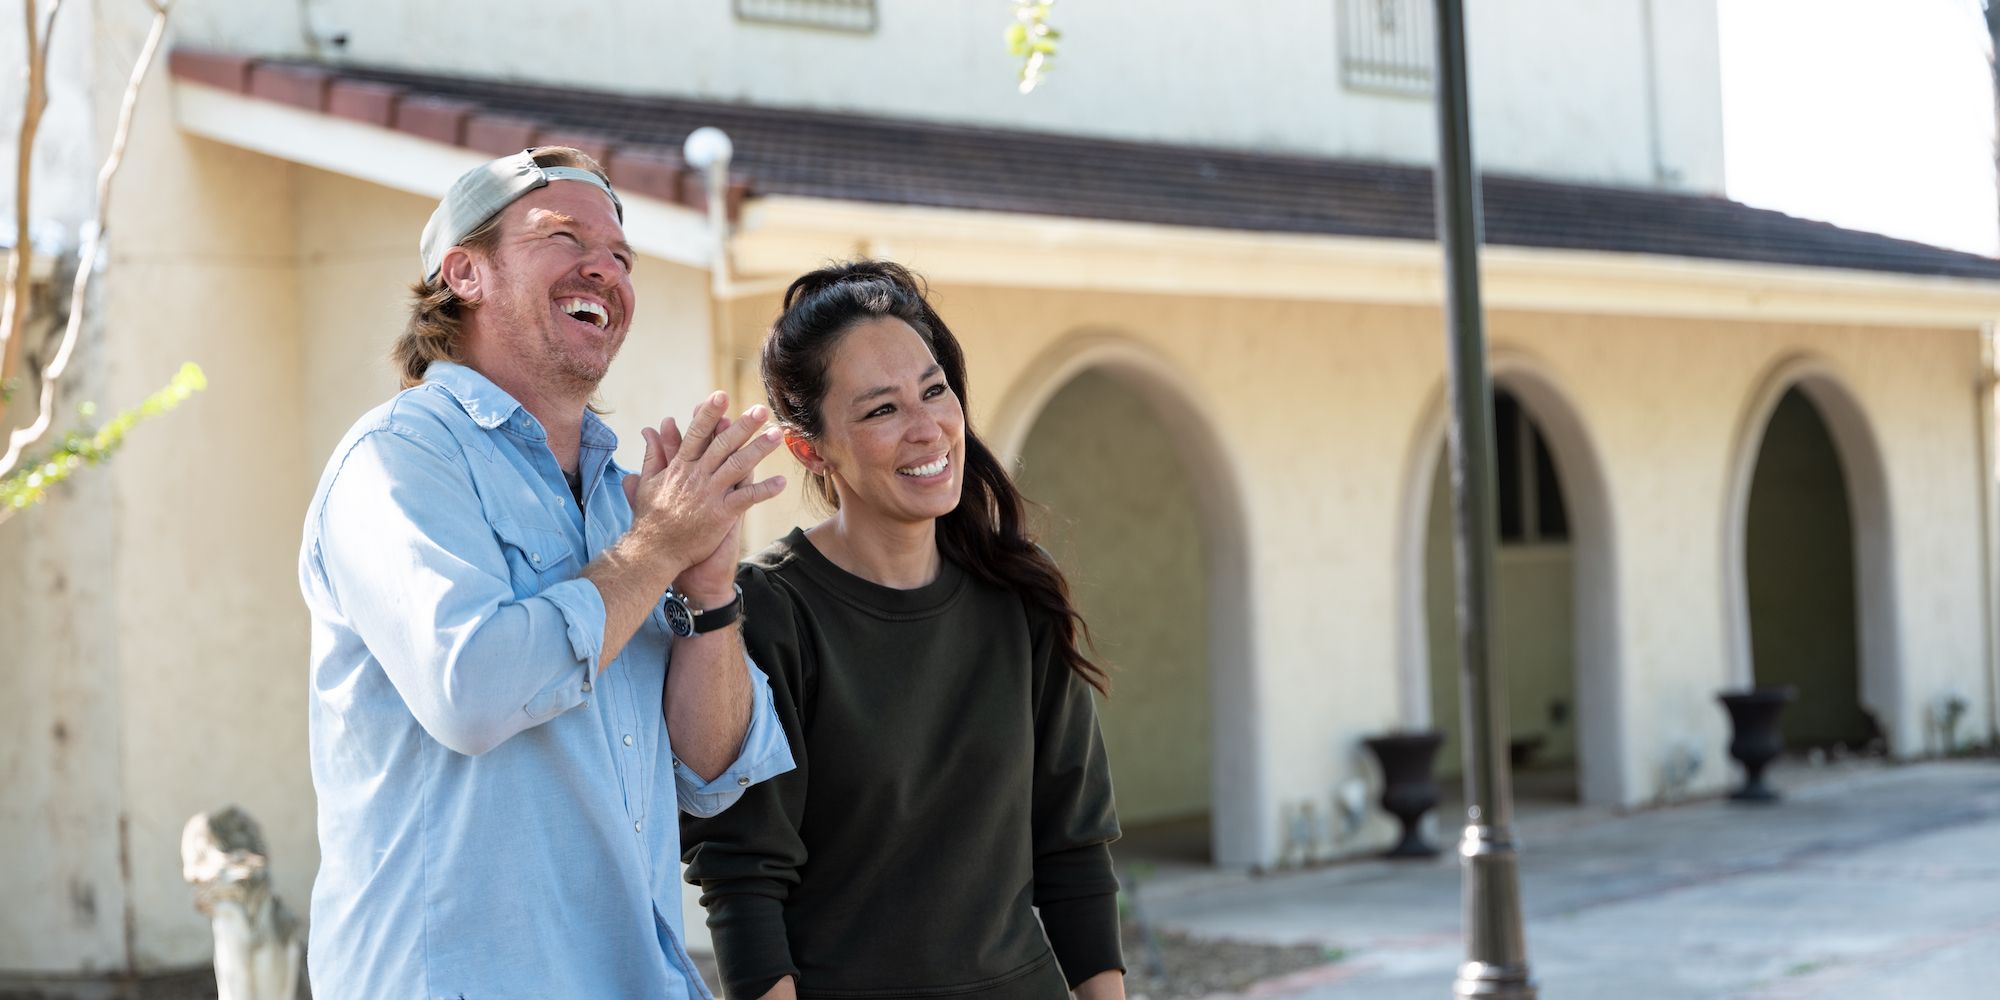 Full Guide To Chip & Joanna Gaines Magnolia Network Shows On Discovery